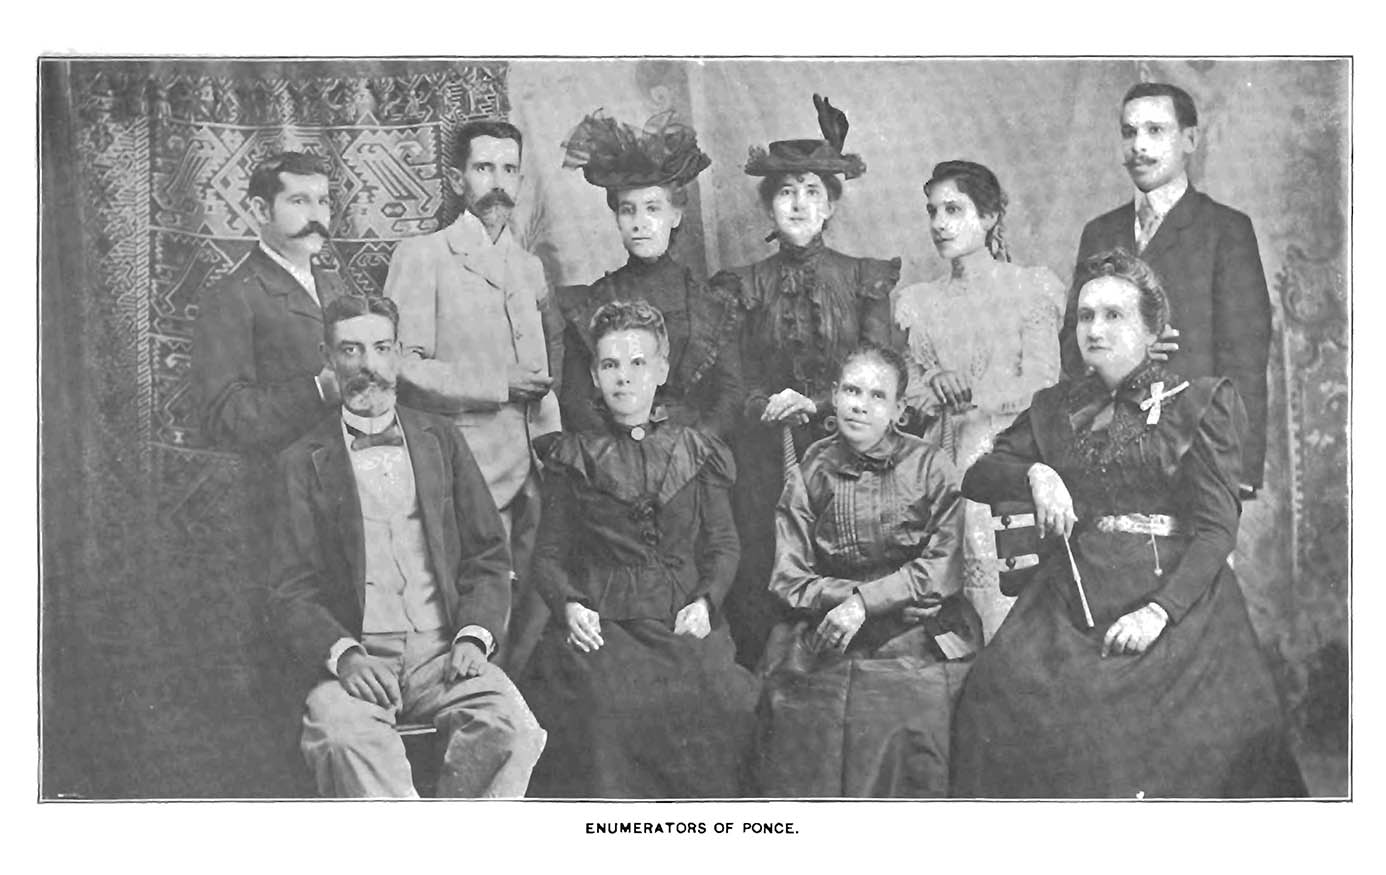 photograph of the census takers from Ponce, Puerto Rico